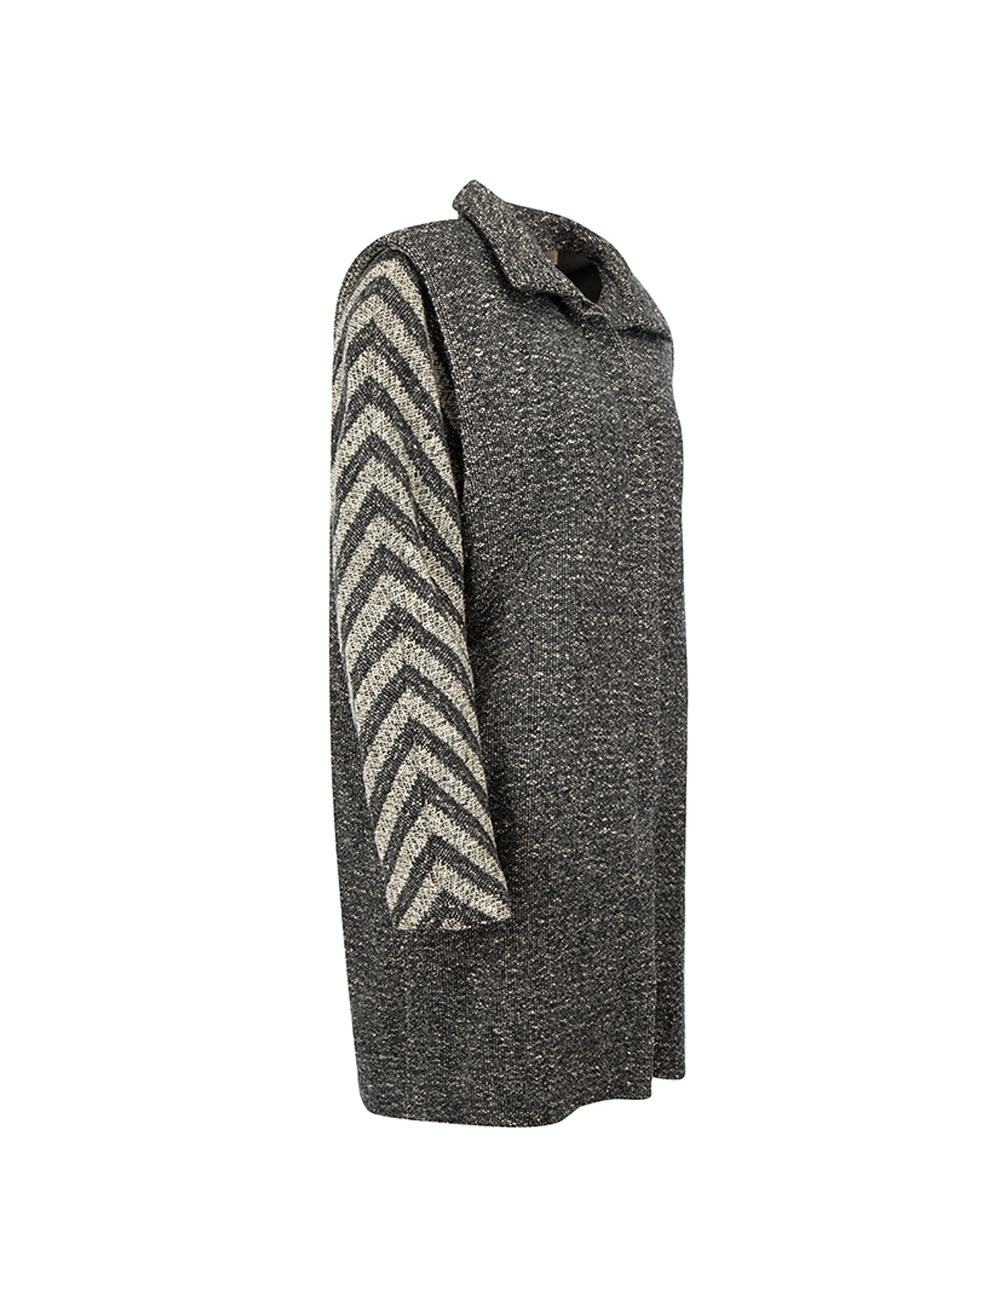 CONDITION is Good. General wear to coat is evident. Moderate signs of wear to the lining with tears at the underarms on this used Versace designer resale item. 



Details


Grey

Wool

Long coat

Single breasted

Chevron striped sleeves

Front side